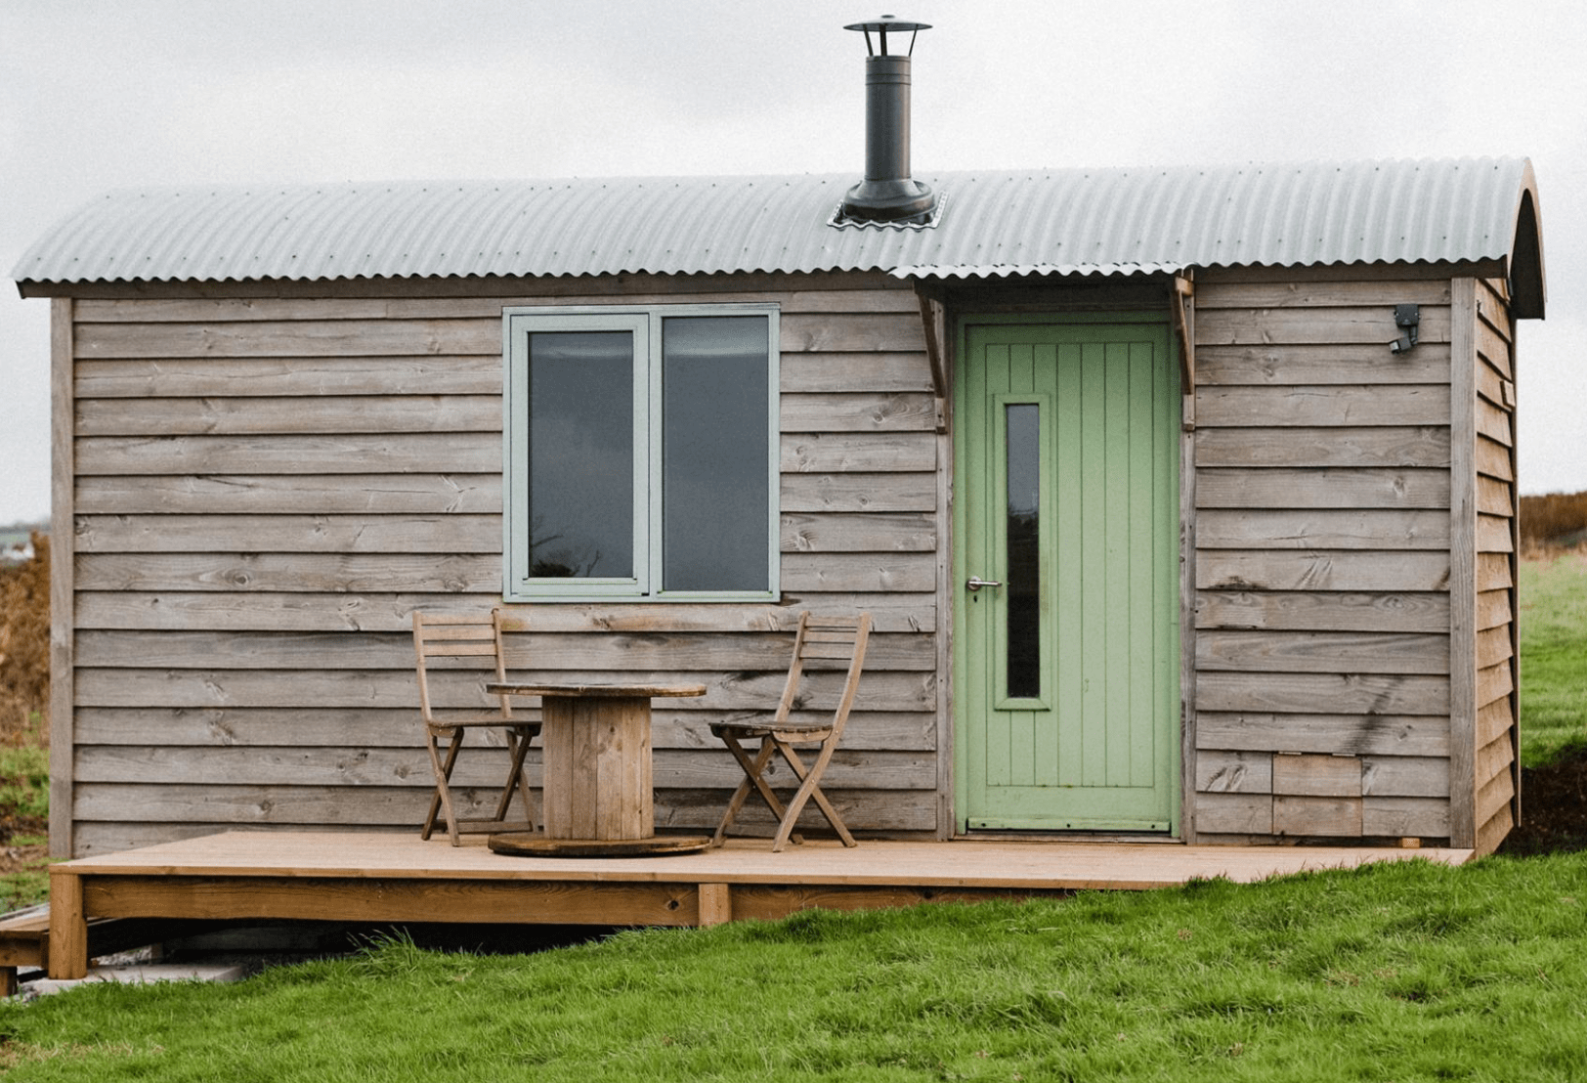 Mount Pleasant Ecological Park Campsite, Camping Pods and Shepherds Huts 